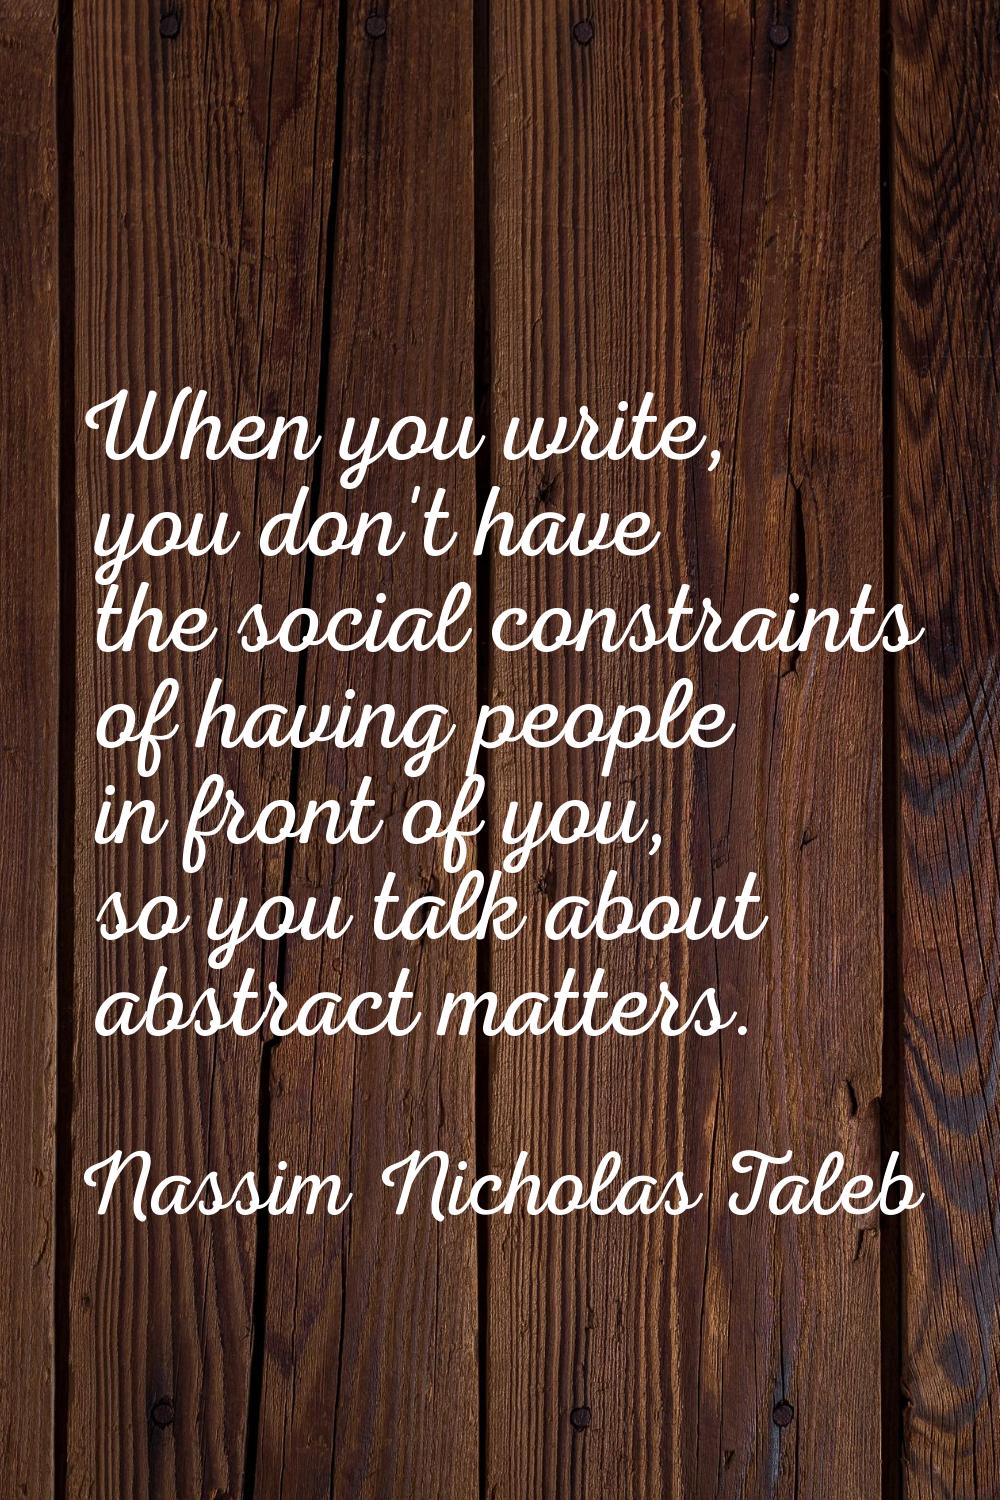 When you write, you don't have the social constraints of having people in front of you, so you talk